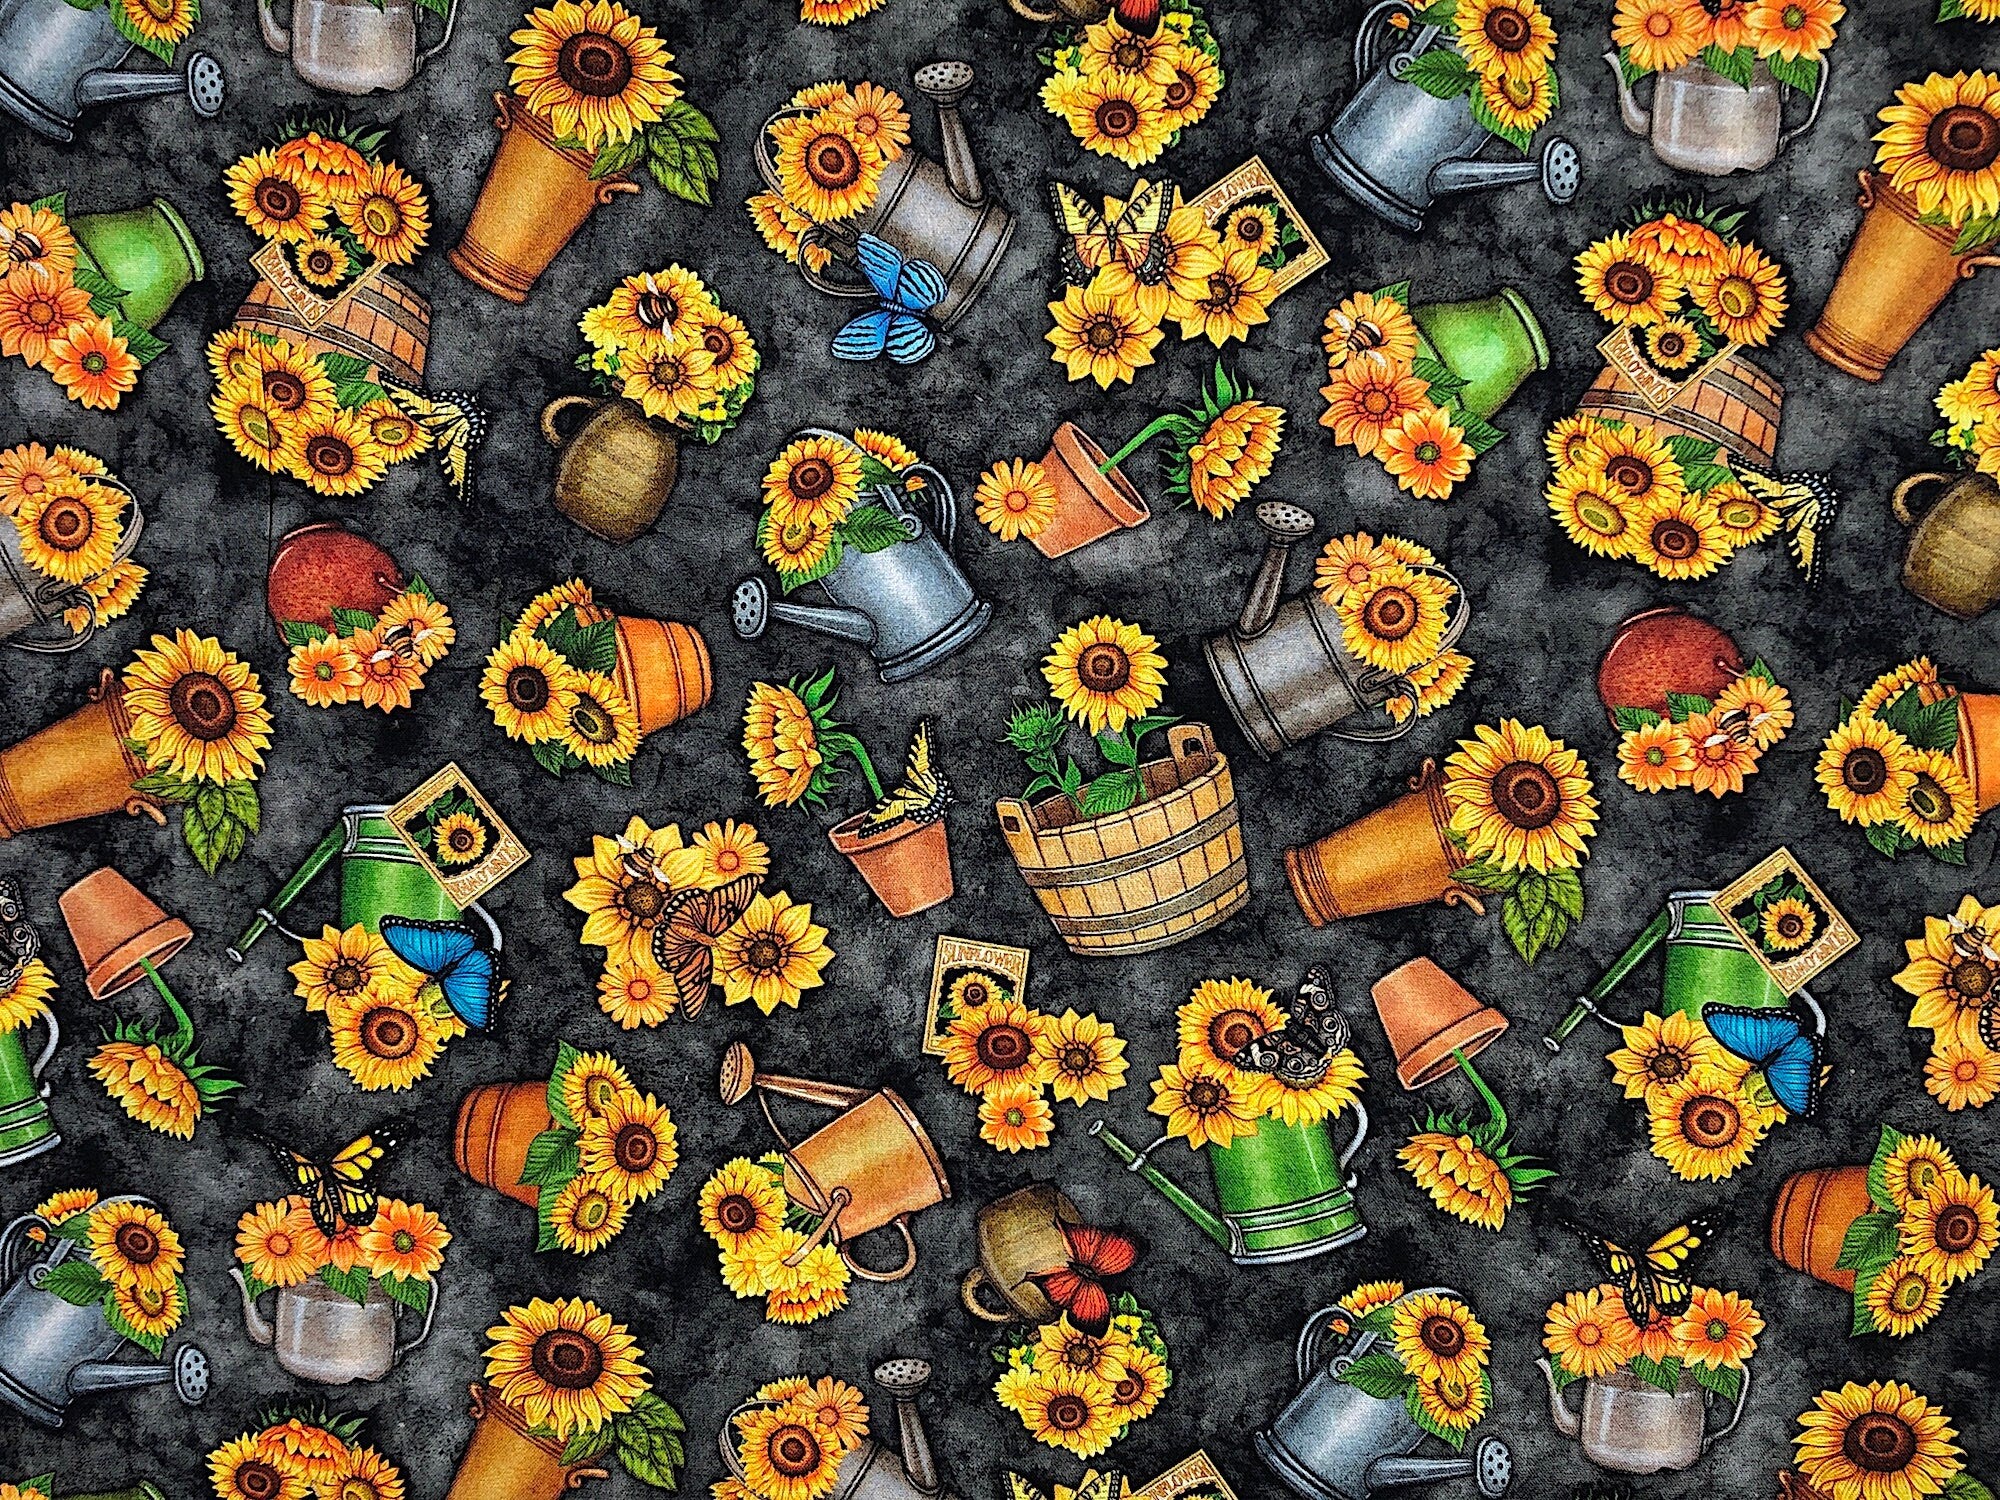 This fabric is part of the Always Face Sunshine Collection. There are watering cans and flower pots full of sunflowers. You will also find seed packets and butterflies throughout the fabric. The background is black.